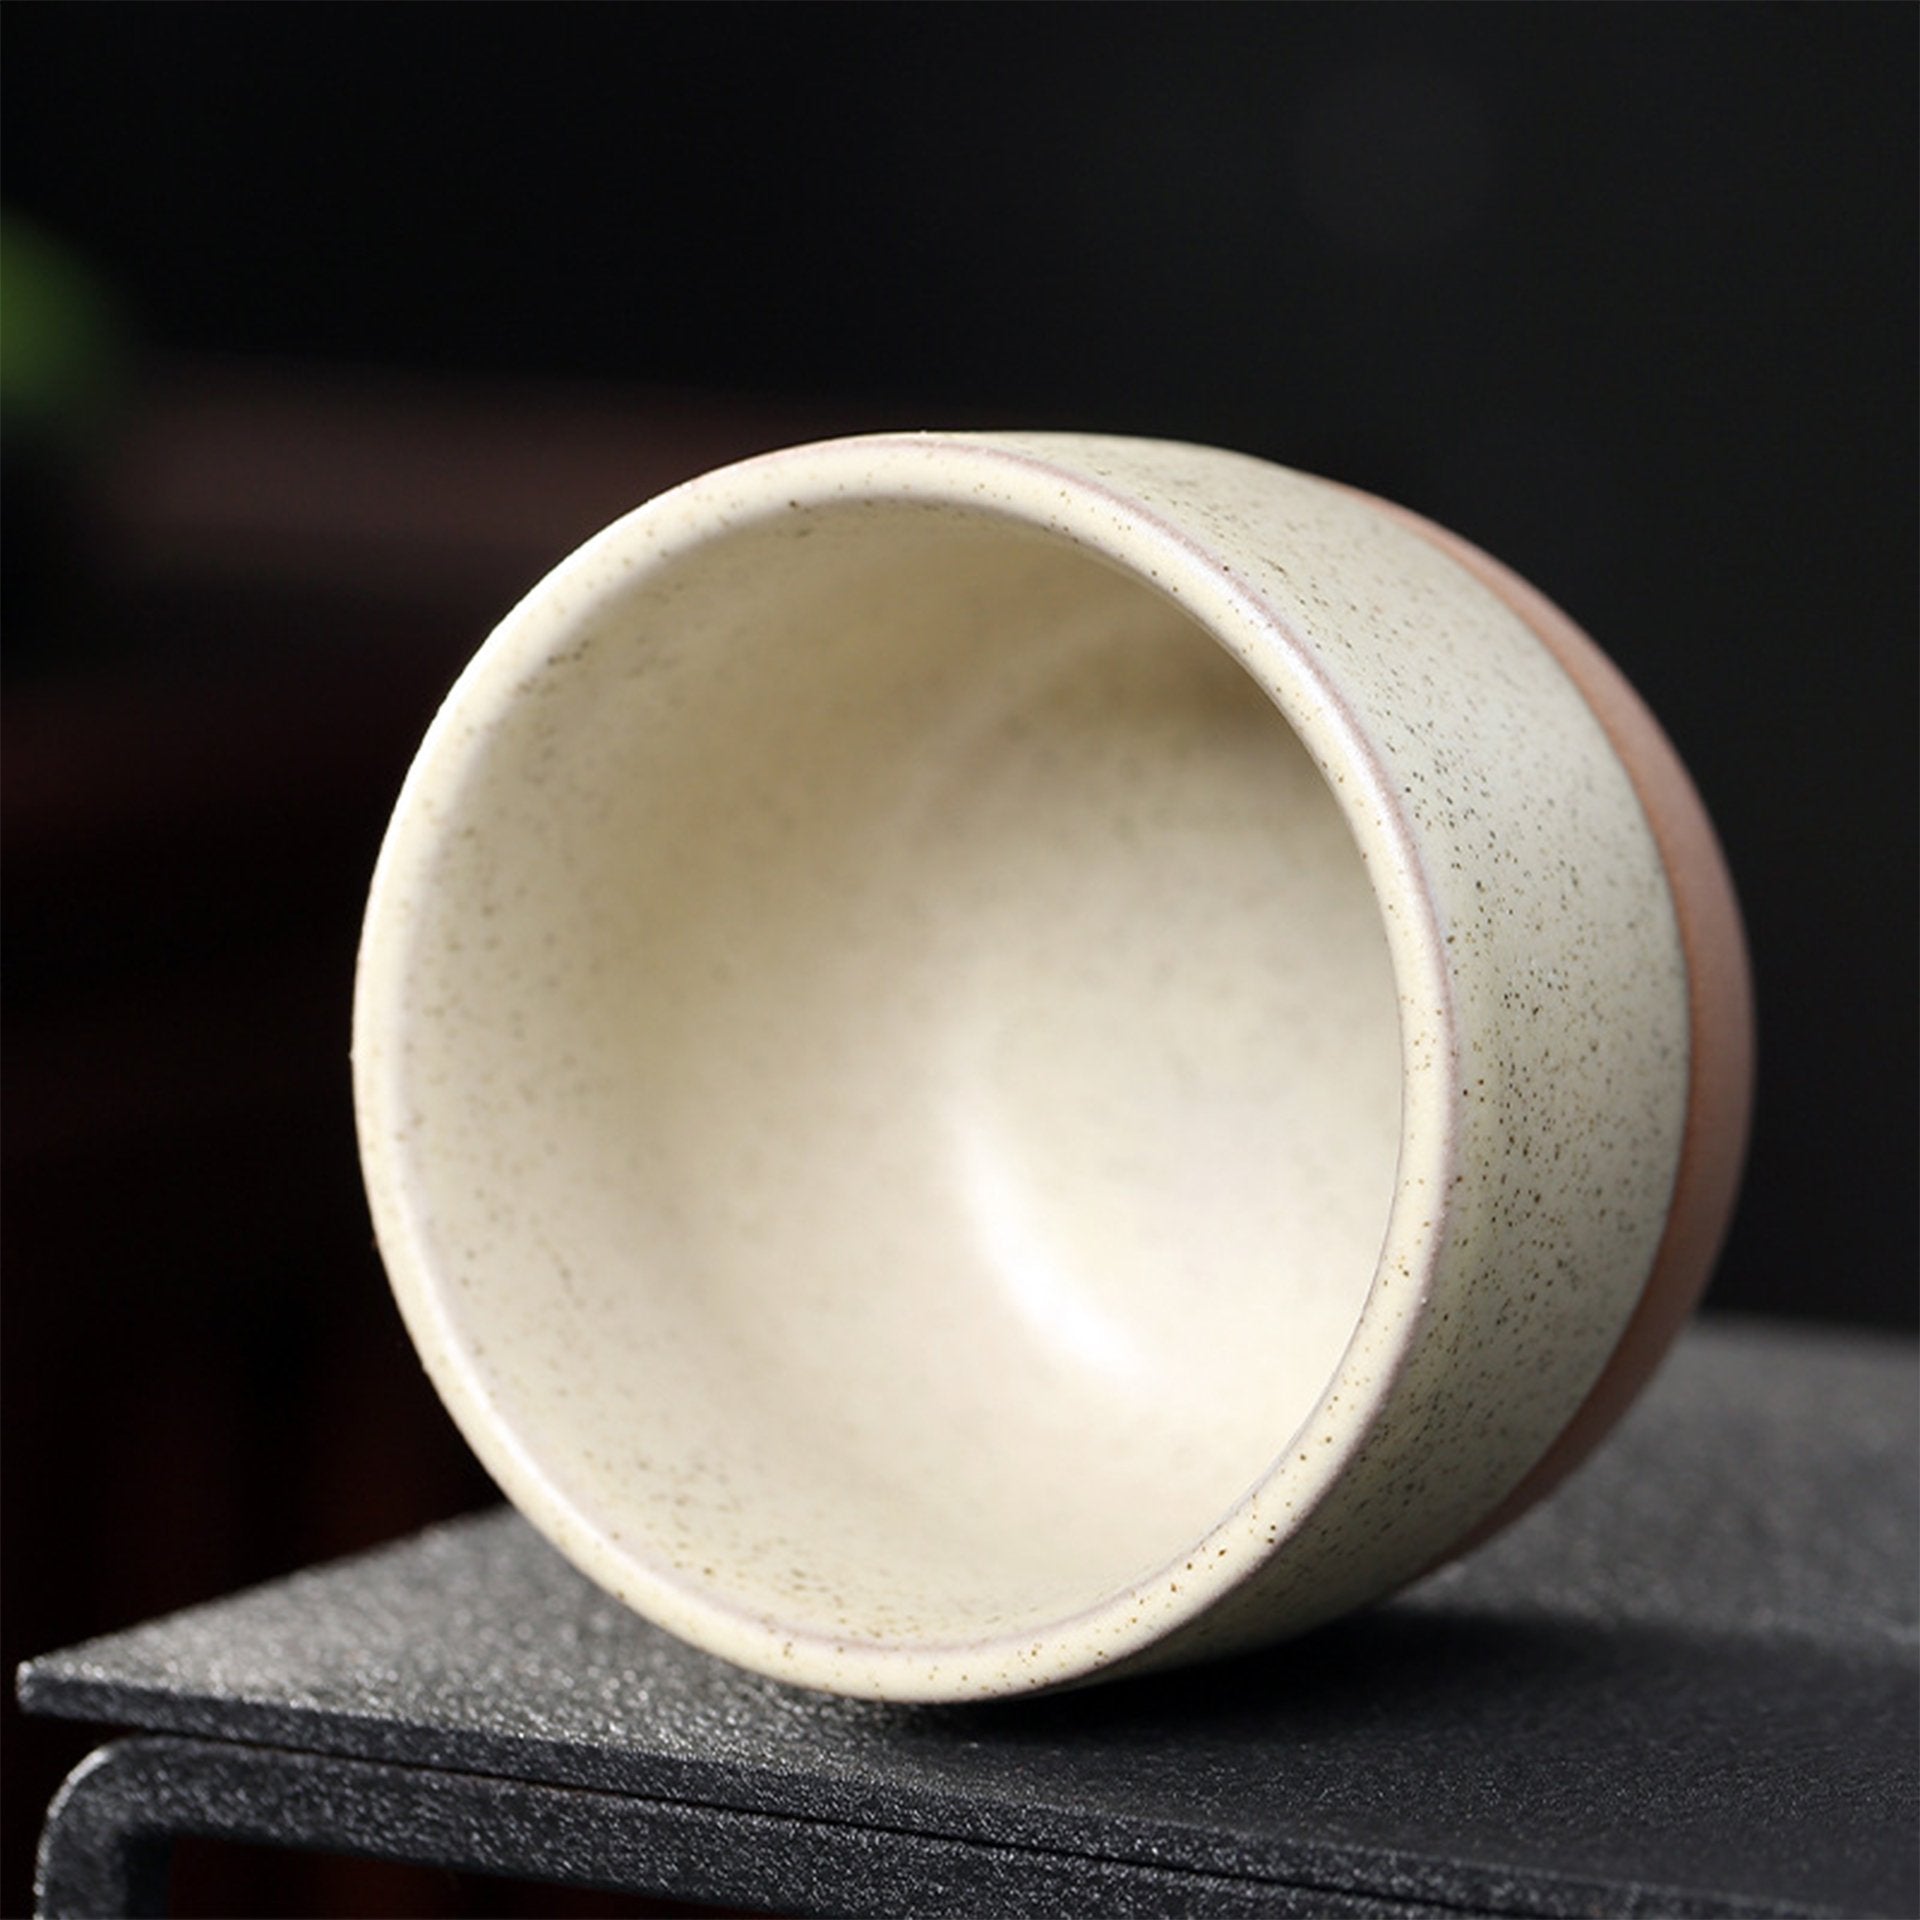 Angled view of a speckled beige Japanese ceramic teacup.